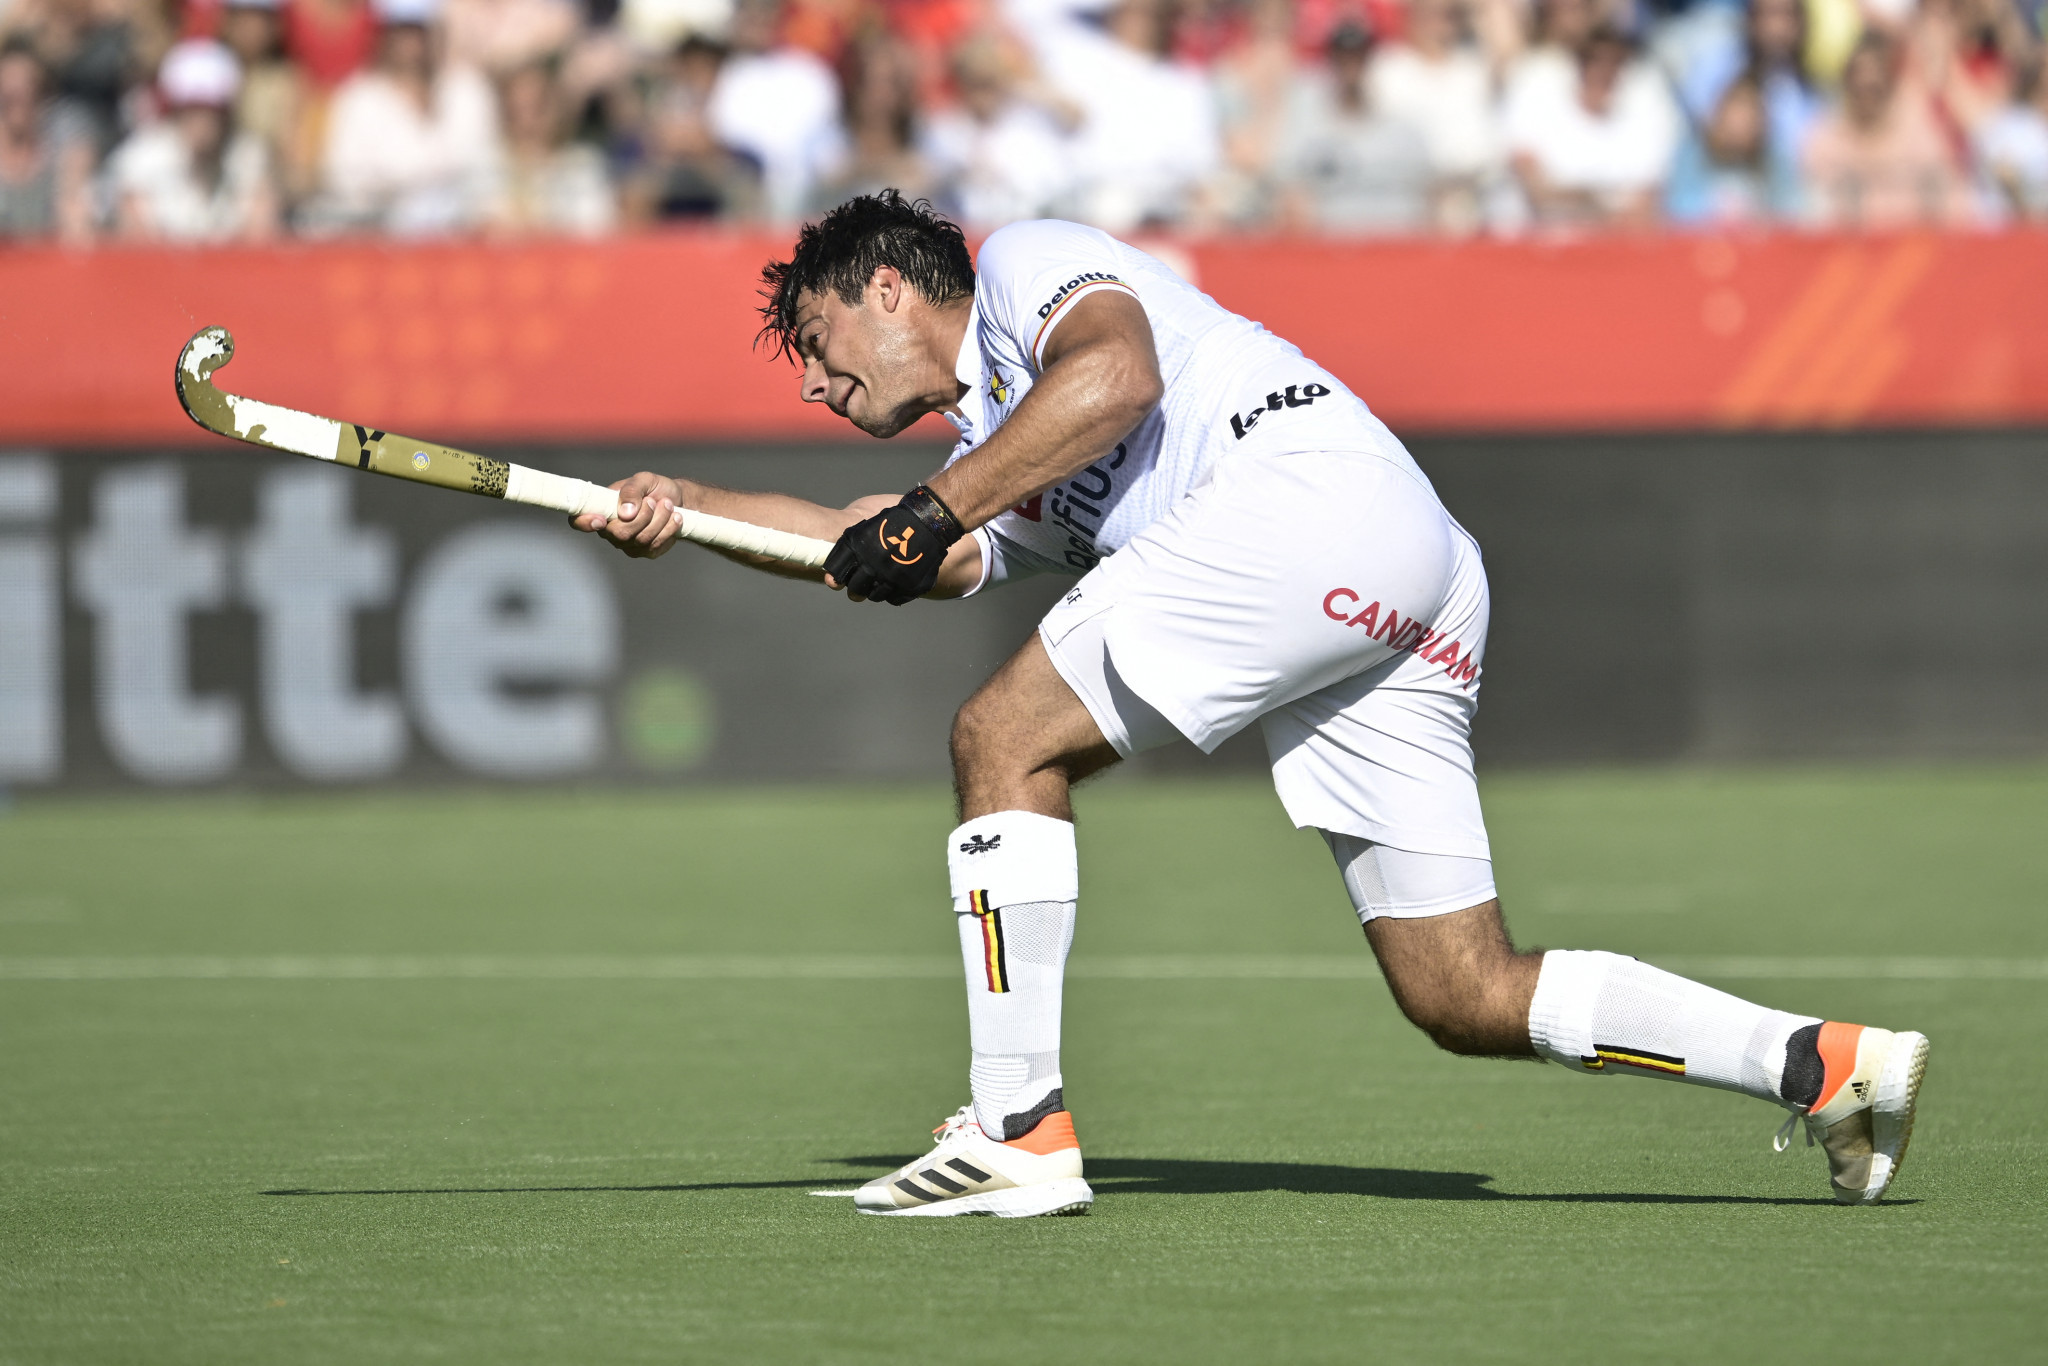 Belgium beat India 5-0 in Antwerp today in the FIH Pro League ©Getty Images